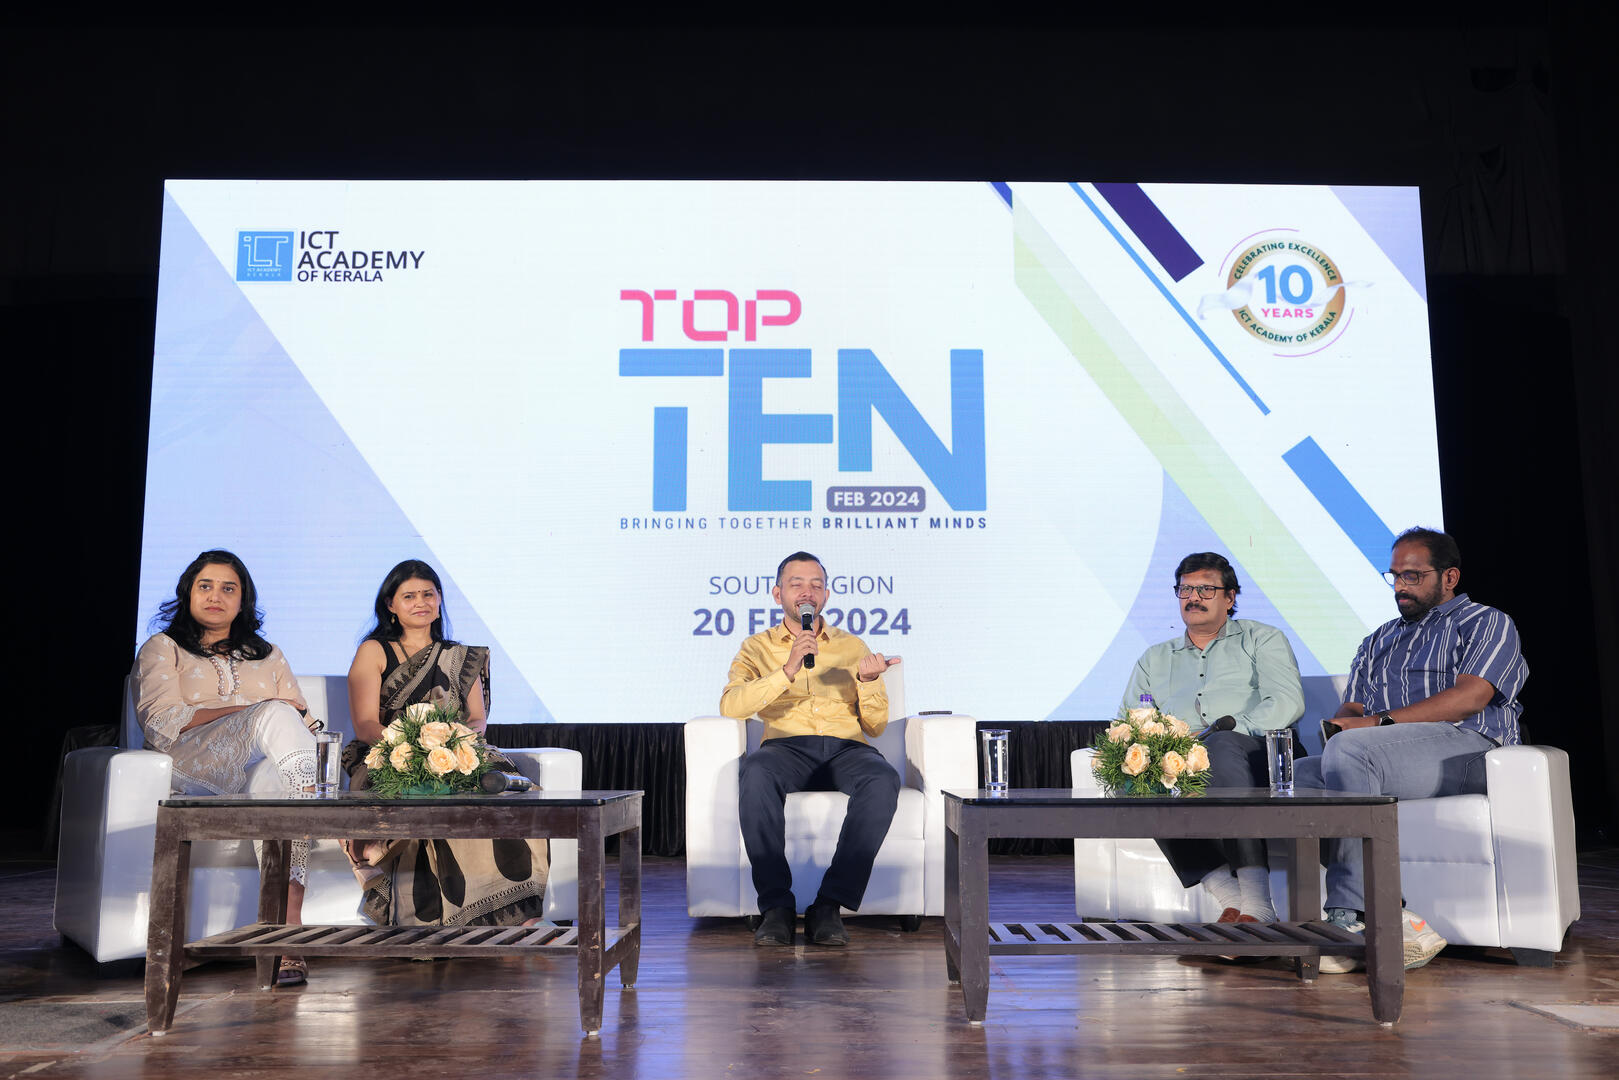 Technology experts interacted with academia at the 'Top10' event by the ICT Academy of Kerala